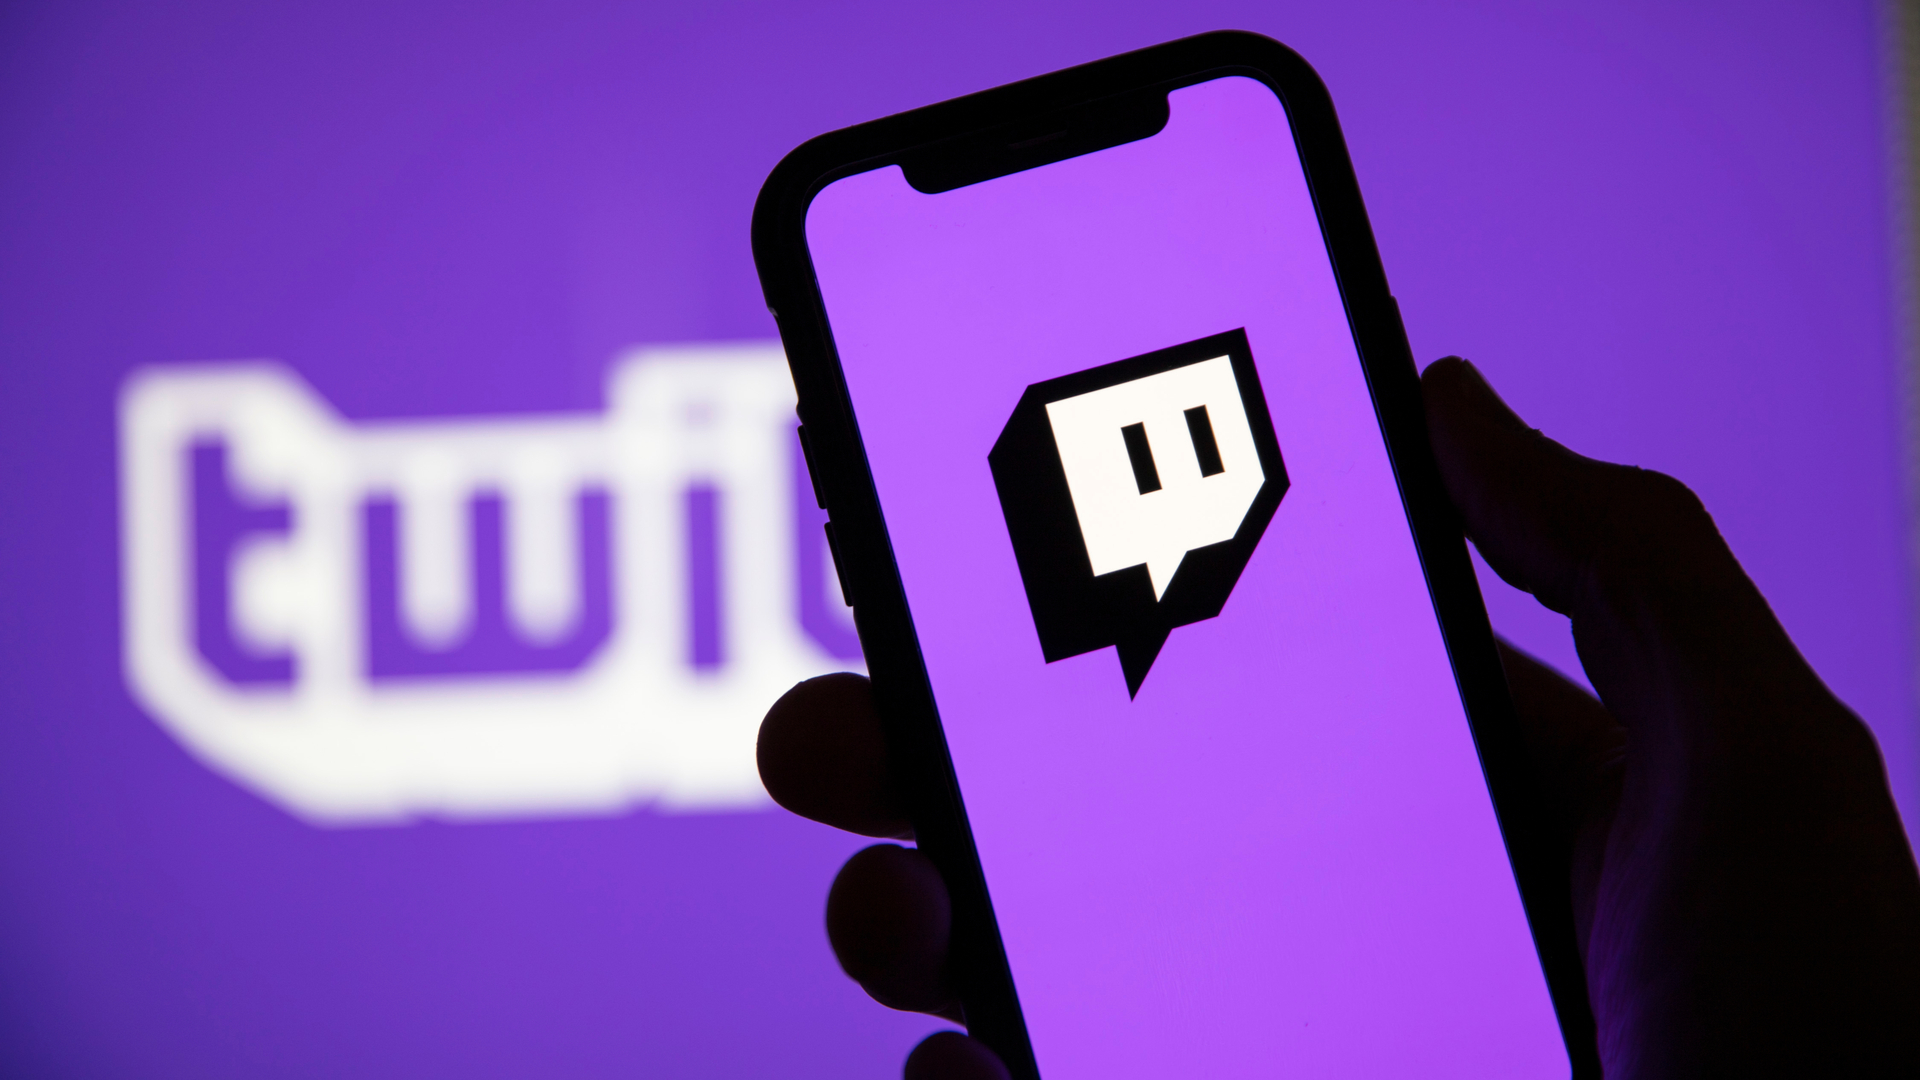 The main differences between Twitch’s and Kick’s guidelines